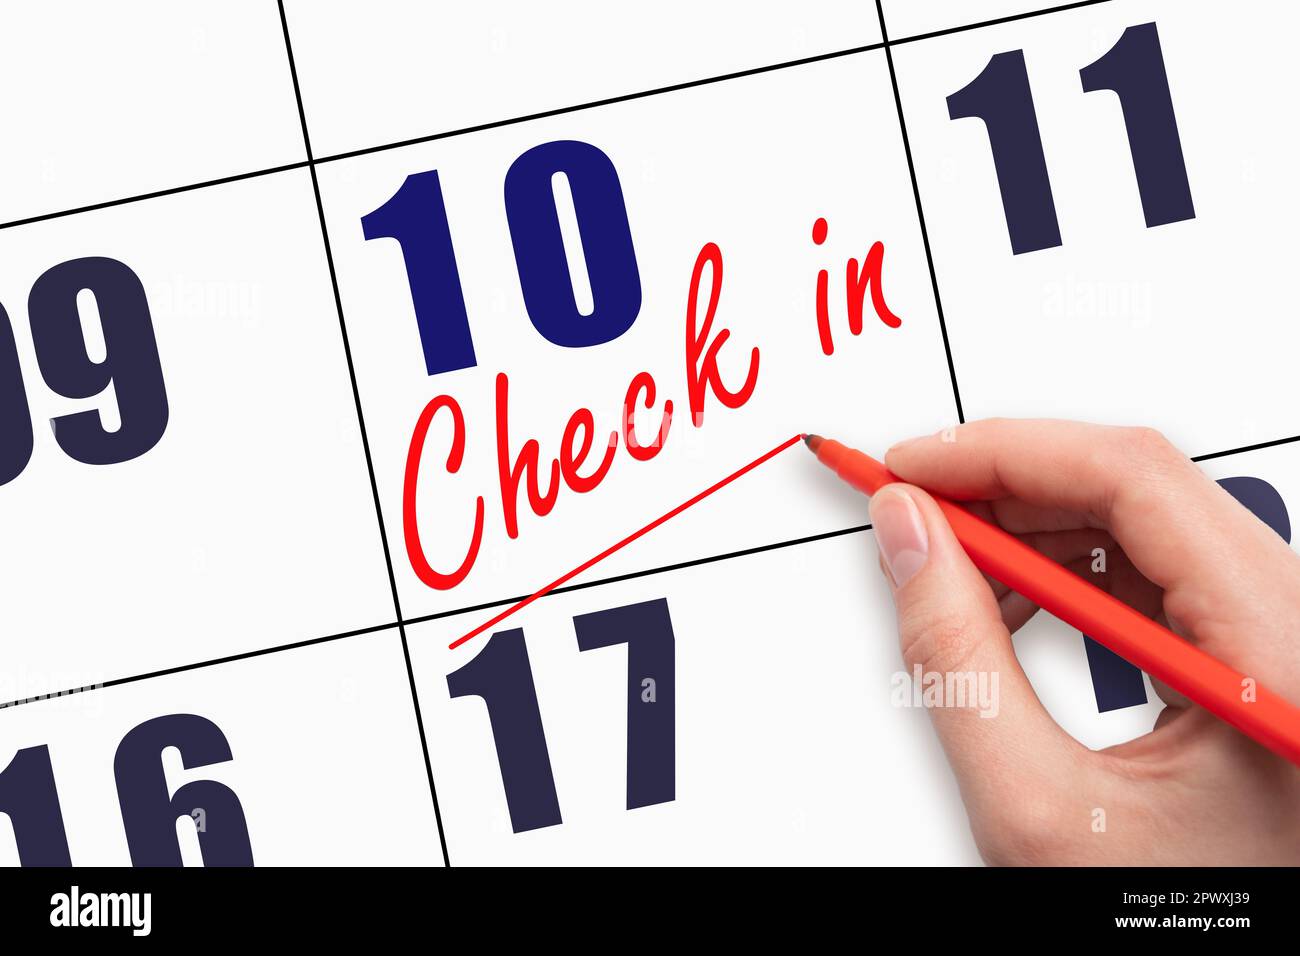 10th day of the month.  Hand writing CHECK IN and drawing a line on calendar date. Business.  Day of the year concept. Stock Photo